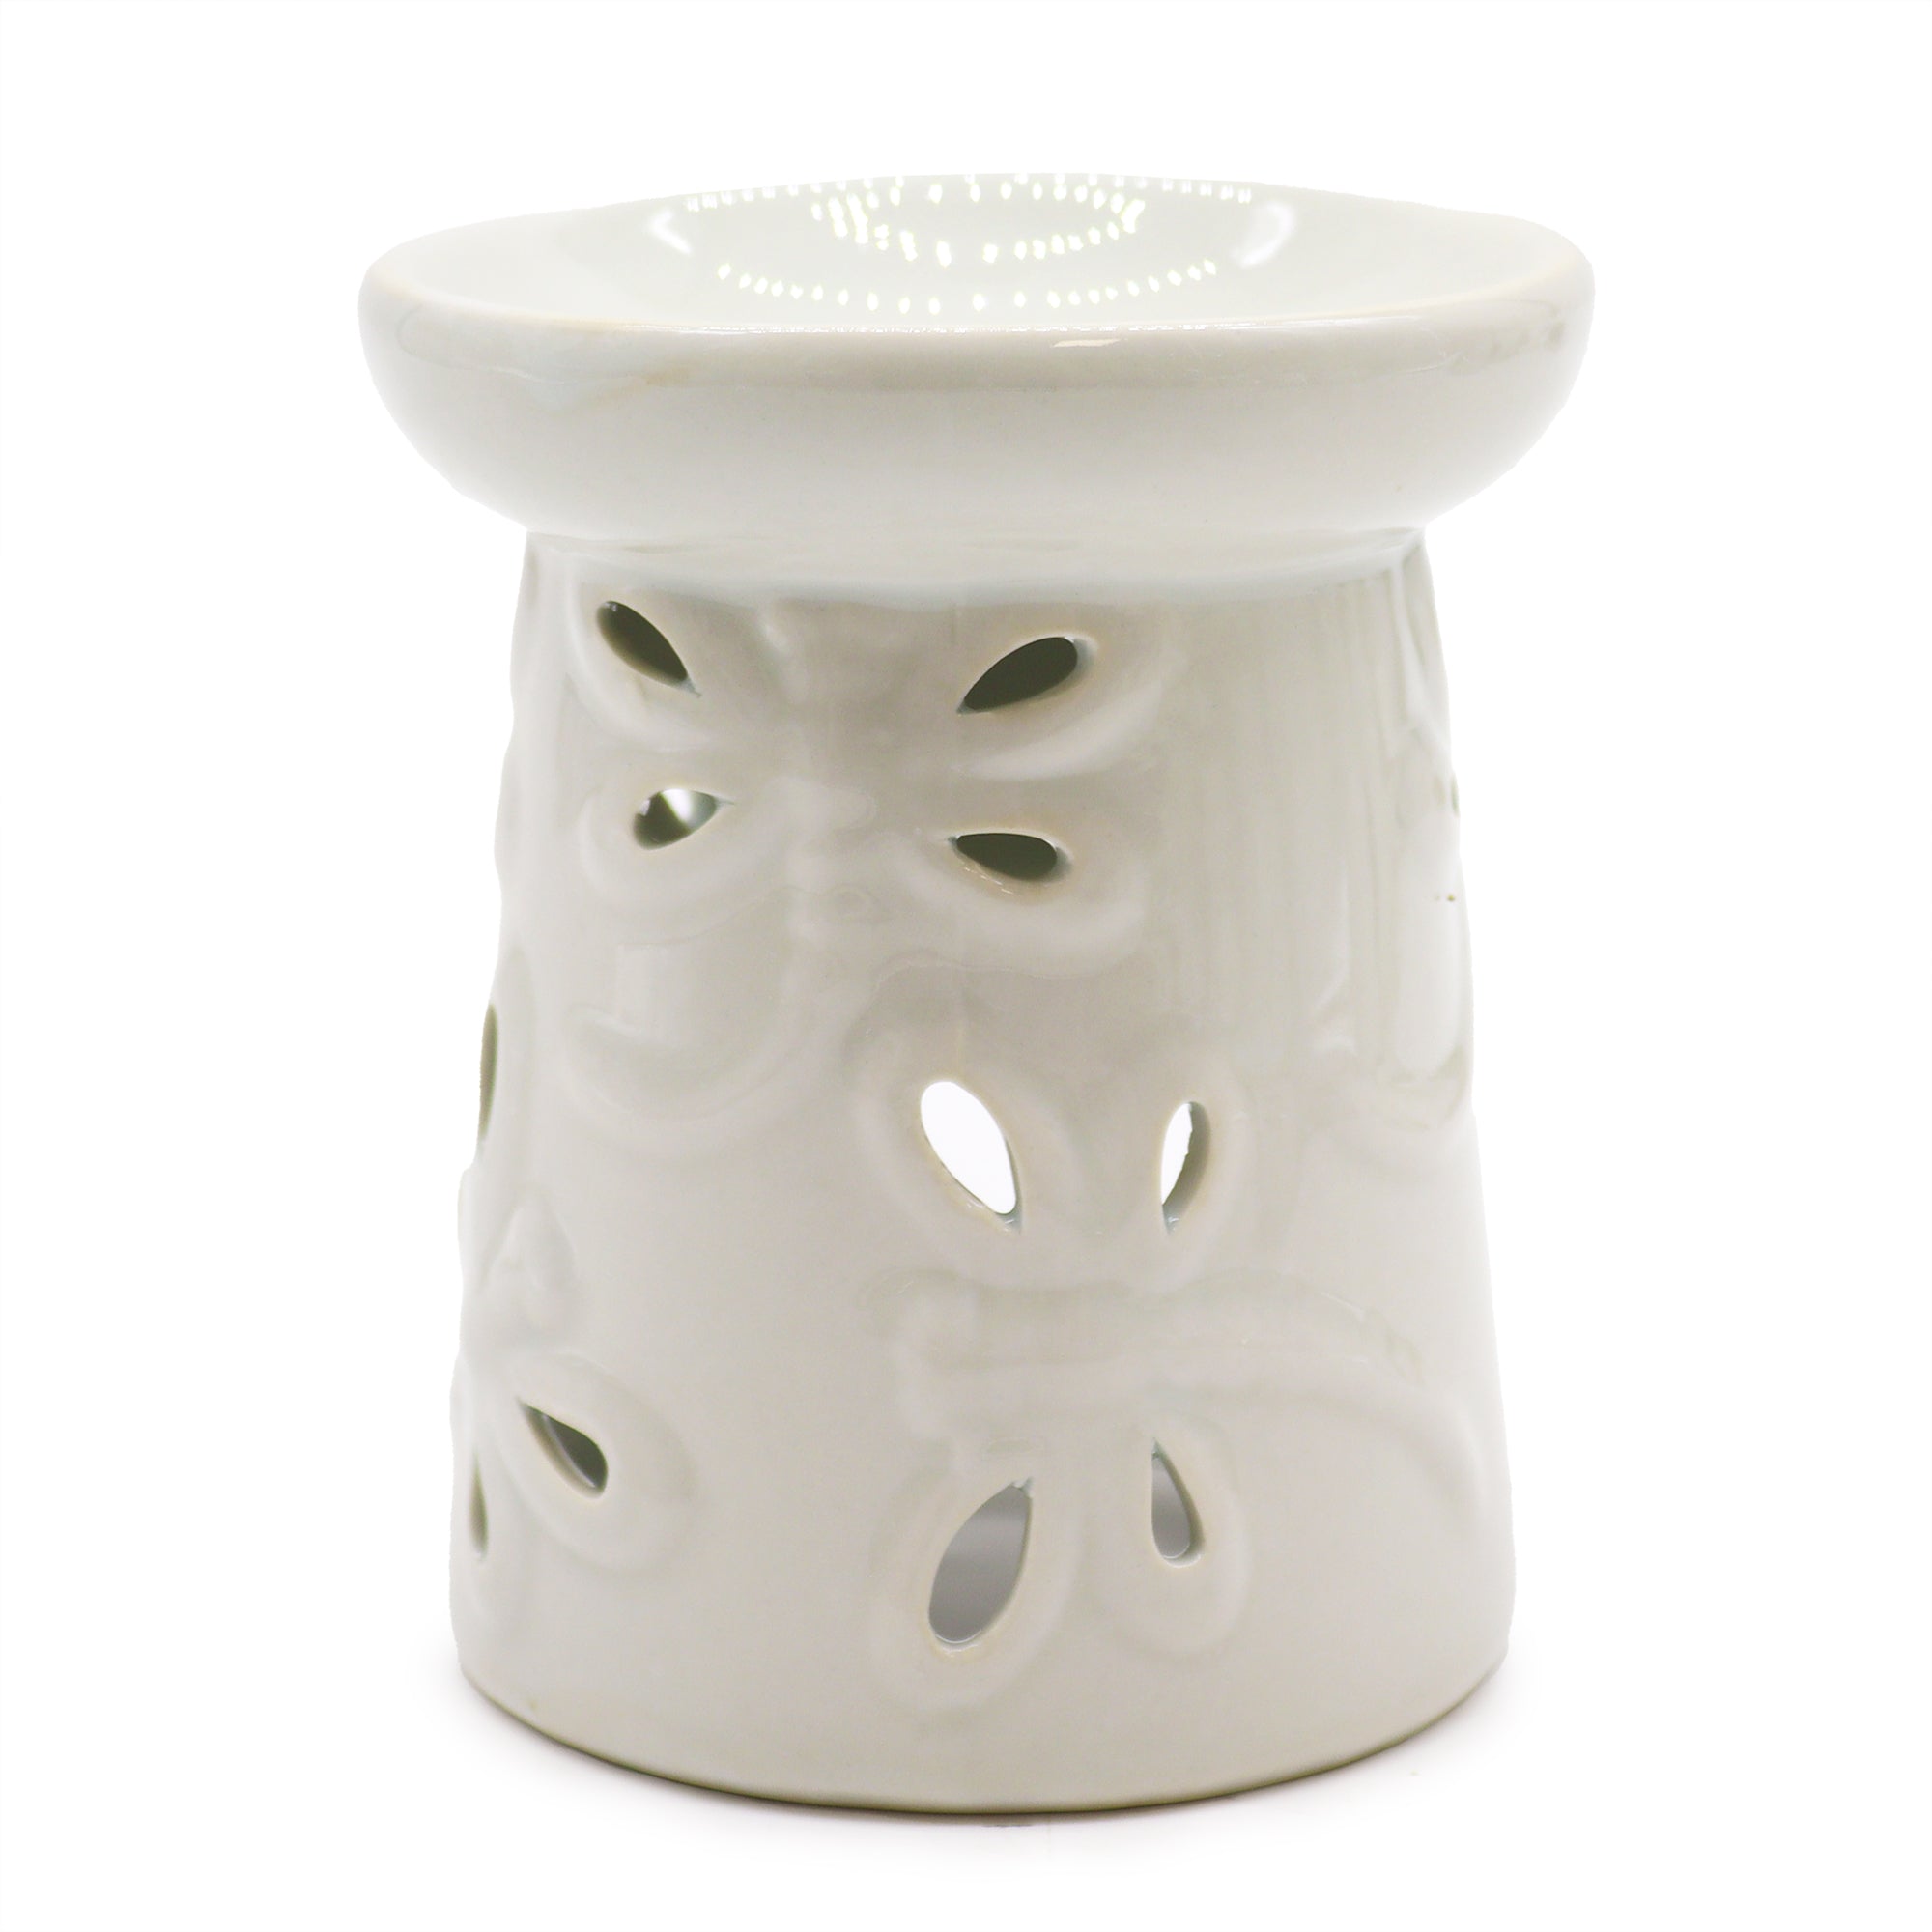 View Classic White Oil Burner Dragonfly information